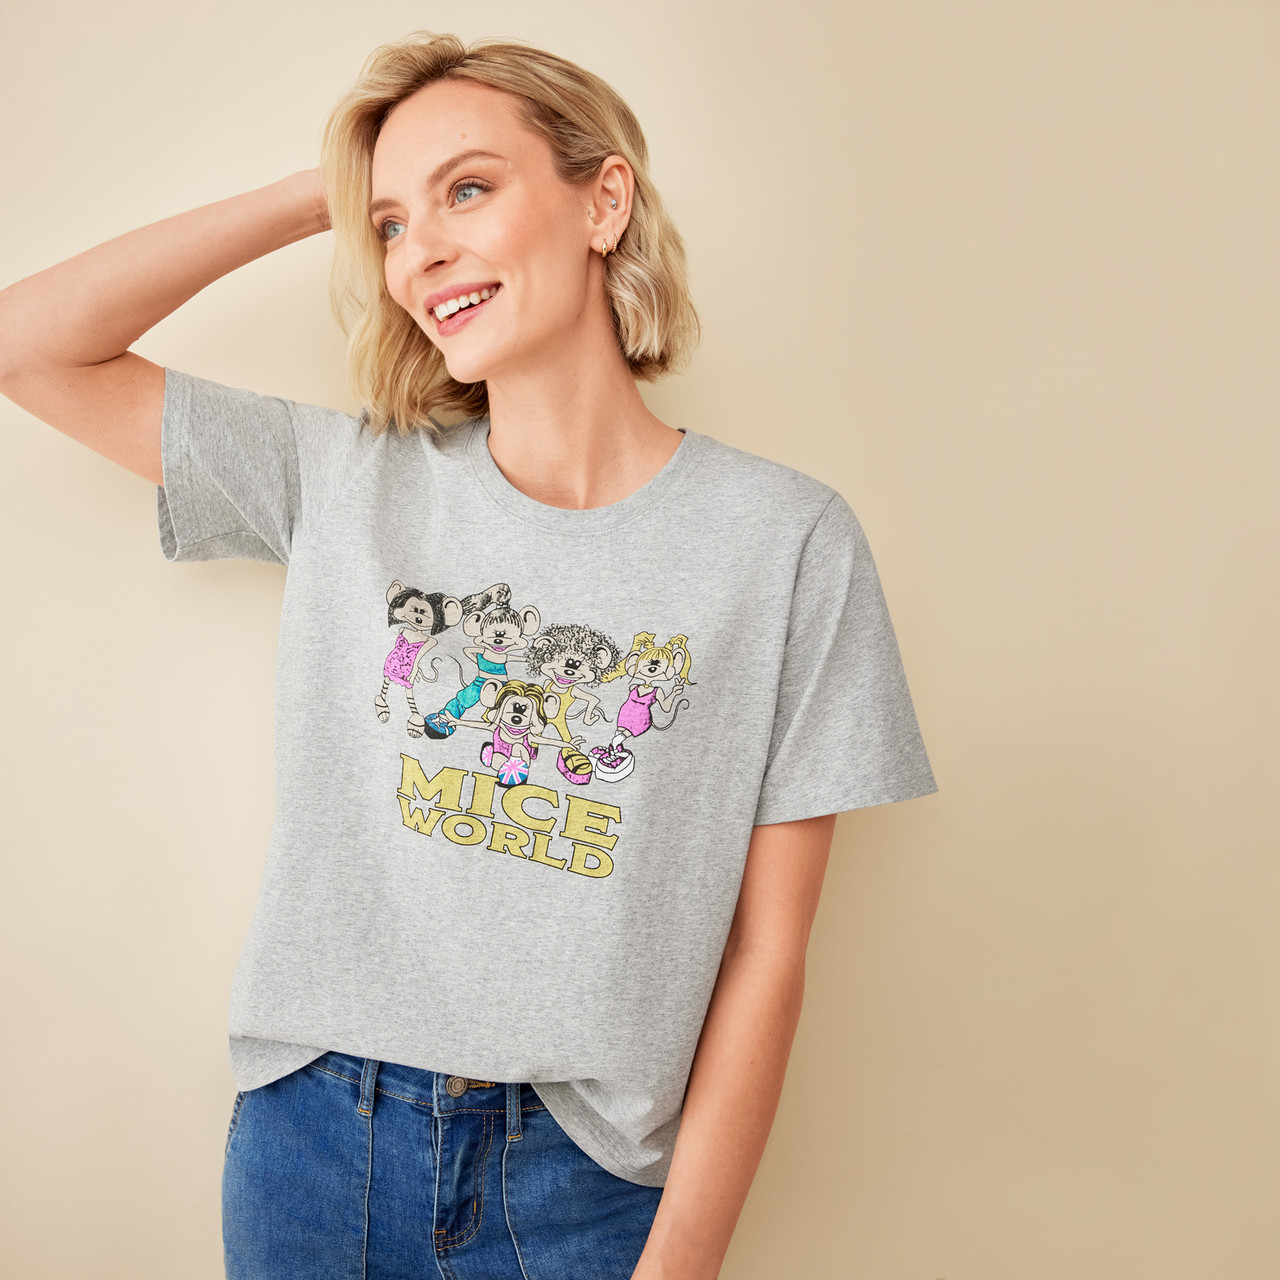 Spice World Tee | Northern Reflections